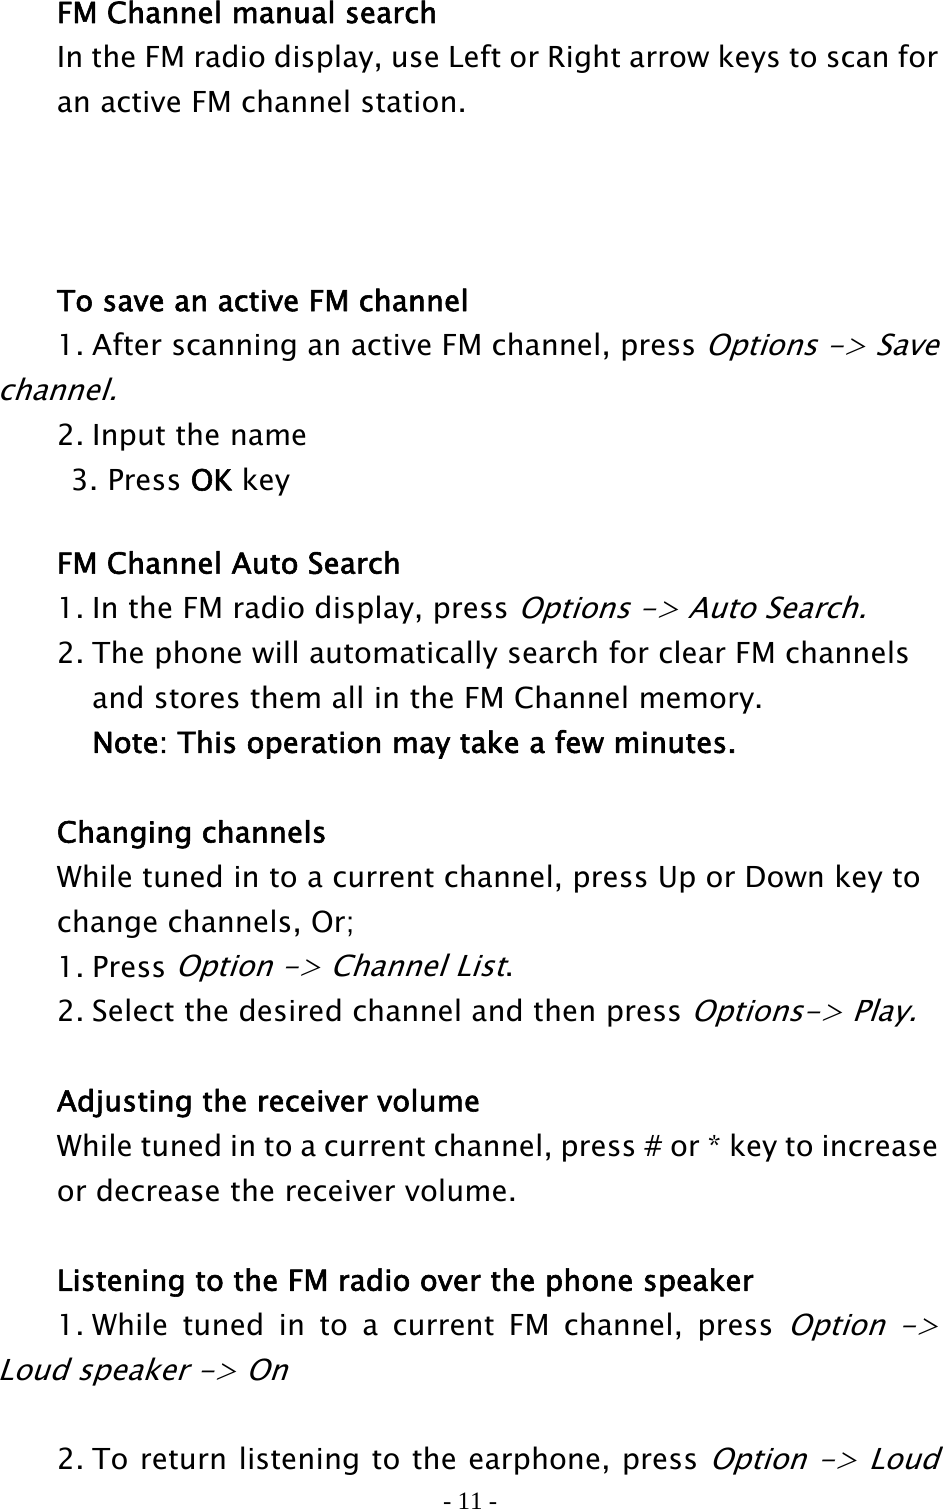 - 11 -   FM Channel manual search   In the FM radio display, use Left or Right arrow keys to scan for     an active FM channel station.        To save an active FM channel   1. After scanning an active FM channel, press Options -&gt; Save channel.    2. Input the name      3. Press OK key    FM Channel Auto Search   1. In the FM radio display, press Options -&gt; Auto Search.    2. The phone will automatically search for clear FM channels     and stores them all in the FM Channel memory.       Note: This operation may take a few minutes.   Changing channels  While tuned in to a current channel, press Up or Down key to     change channels, Or;  1. Press Option -&gt; Channel List.   2. Select the desired channel and then press Options-&gt; Play.     Adjusting the receiver volume   While tuned in to a current channel, press # or * key to increase     or decrease the receiver volume.    Listening to the FM radio over the phone speaker   1. While tuned in to a current FM channel, press Option -&gt; Loud speaker -&gt; On      2. To return listening to the earphone, press Option -&gt; Loud 